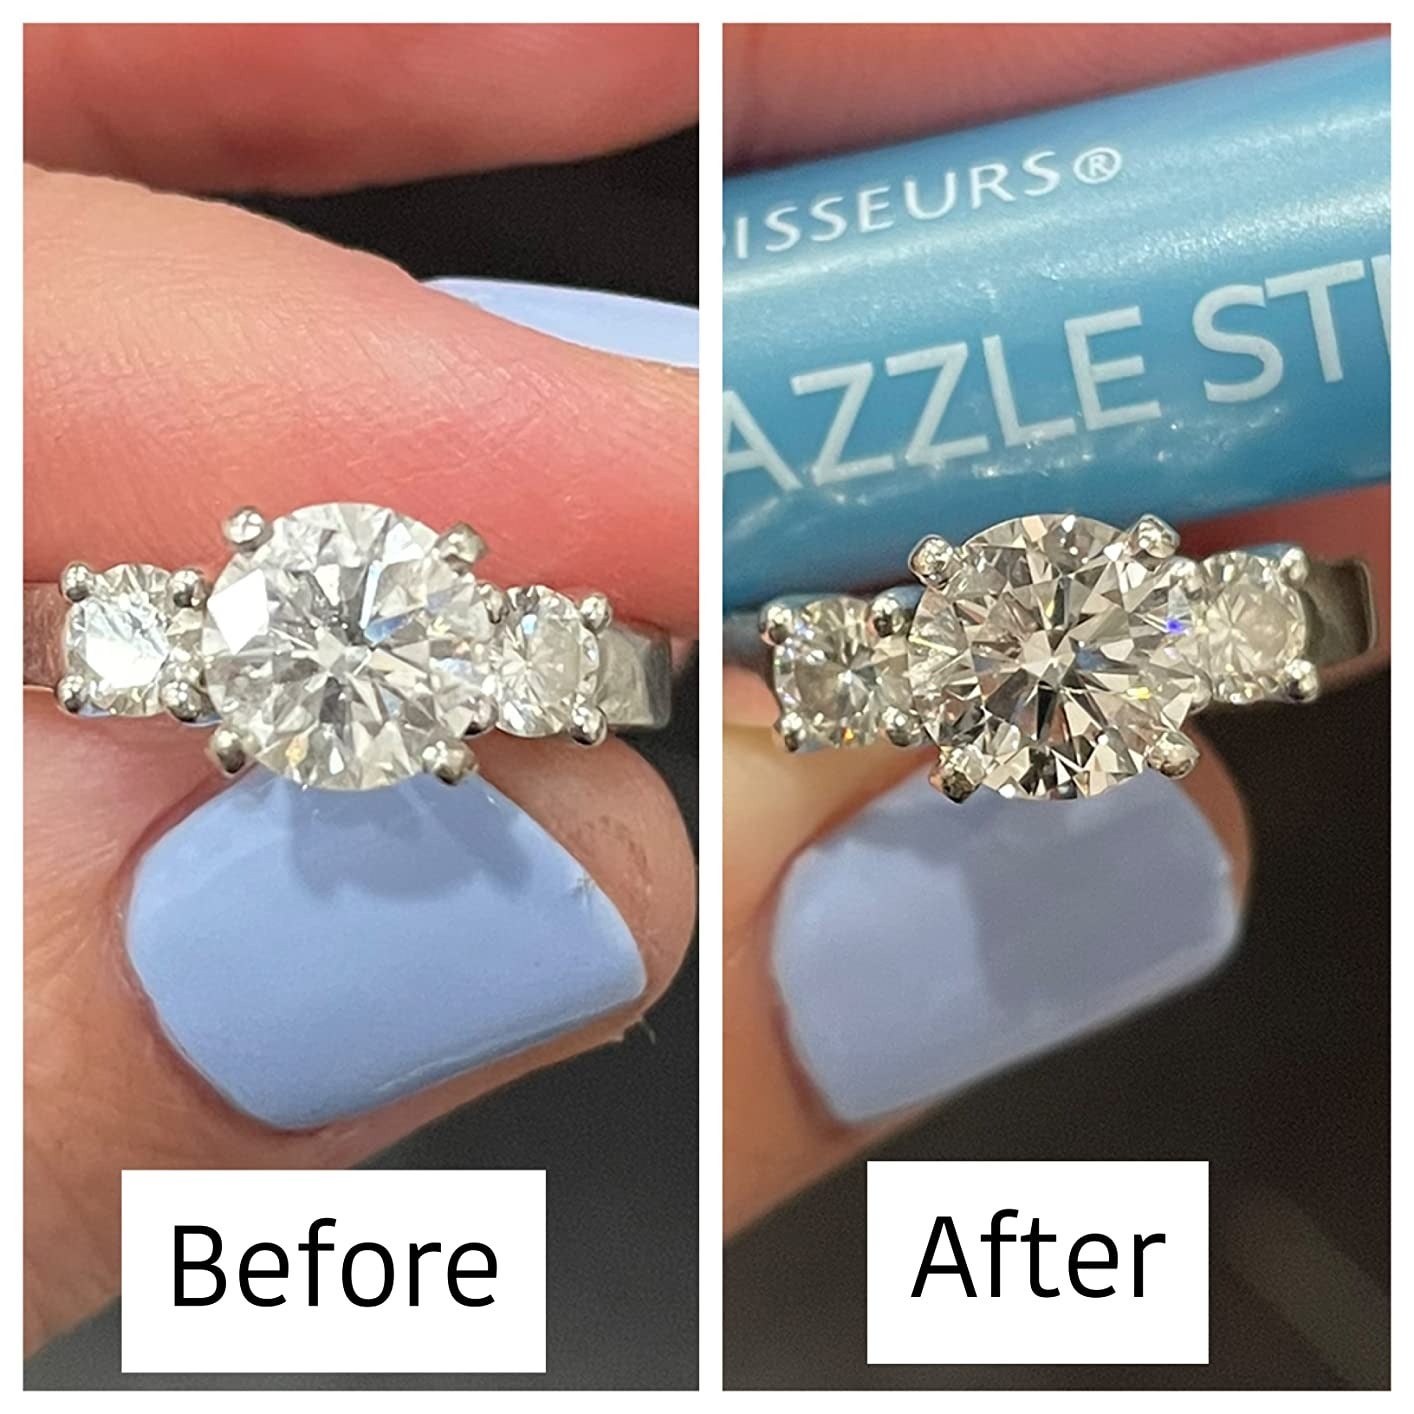 on left, cloudy diamond ring. on right, same ring with a more sparkly appearance and less cloudy stones after using the jewelry cleaning pen